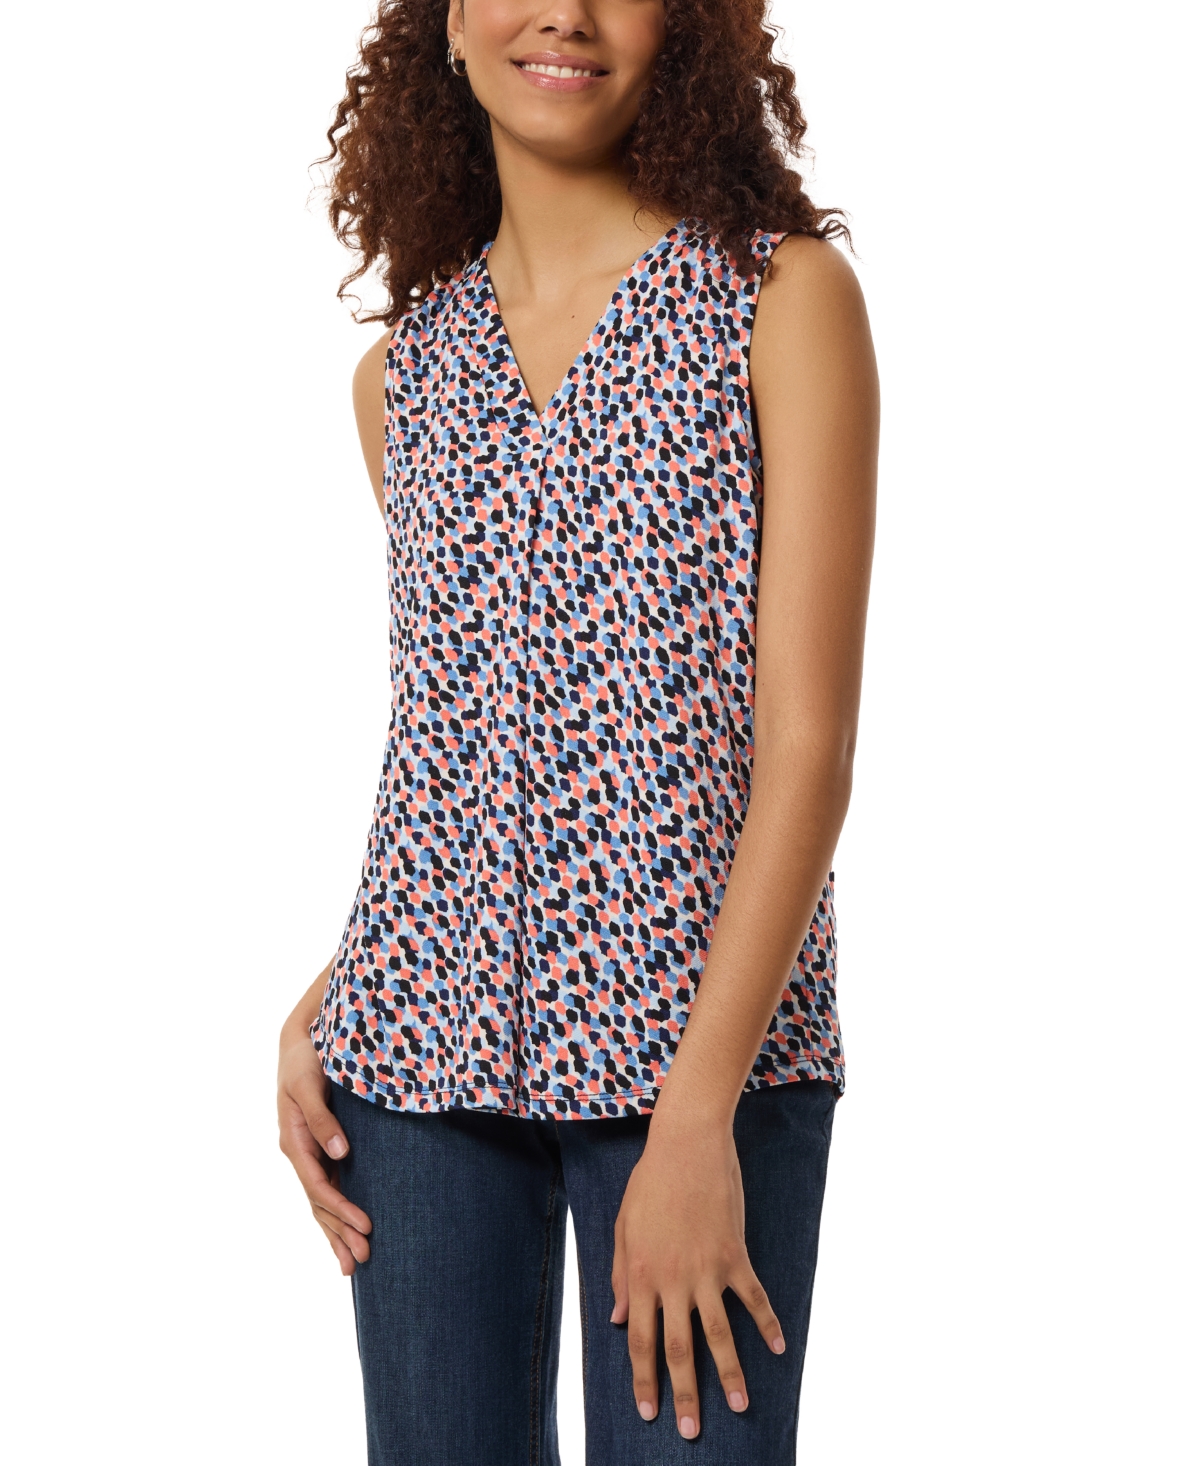 Women's Printed Moss Crepe Sleeveless Blouse - Pacific Navy